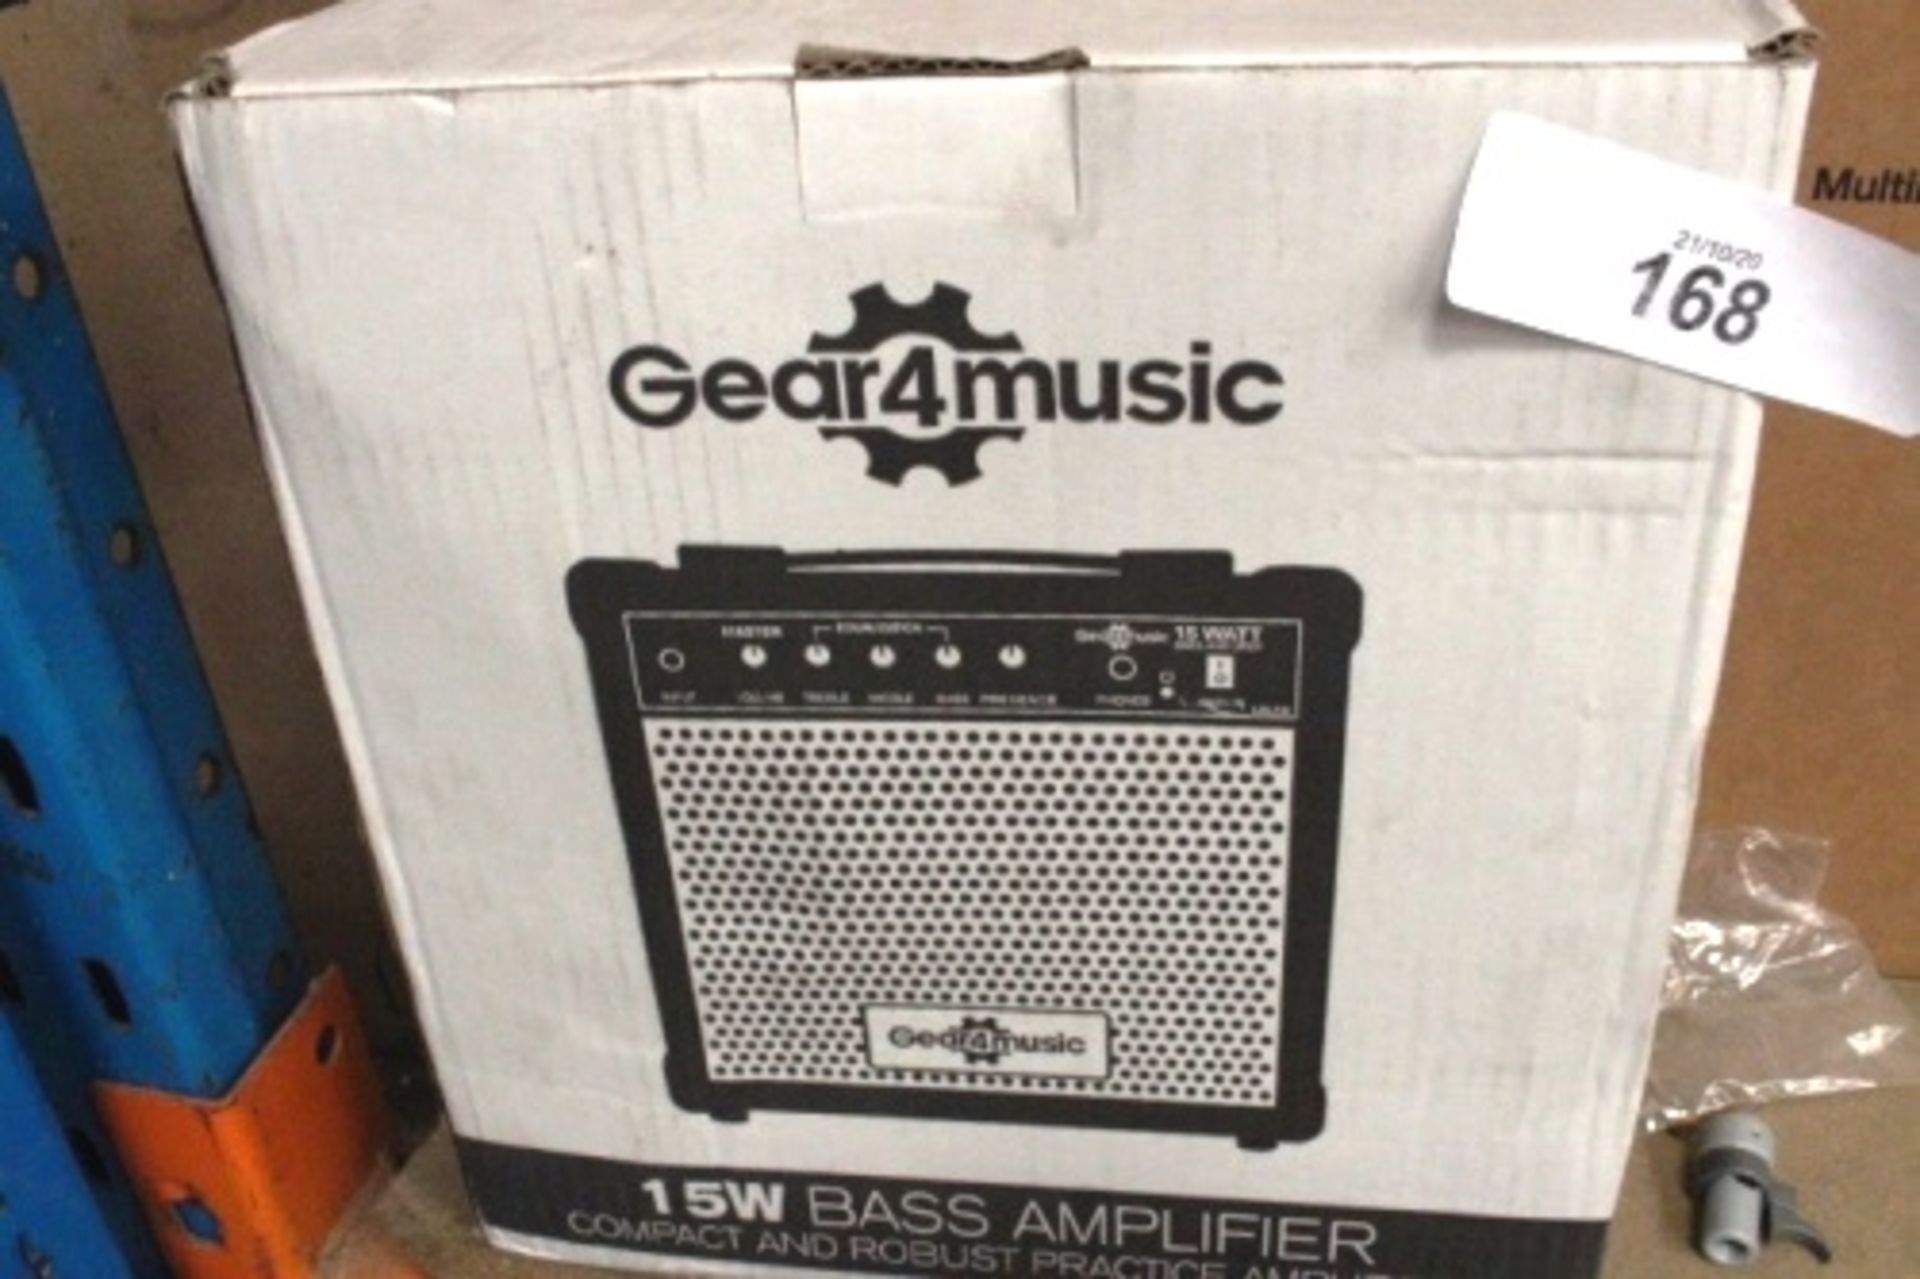 Gear4Music electric bass guitar starter kit includes G4M Squier bass guitar, travel bag, spare - Image 4 of 4